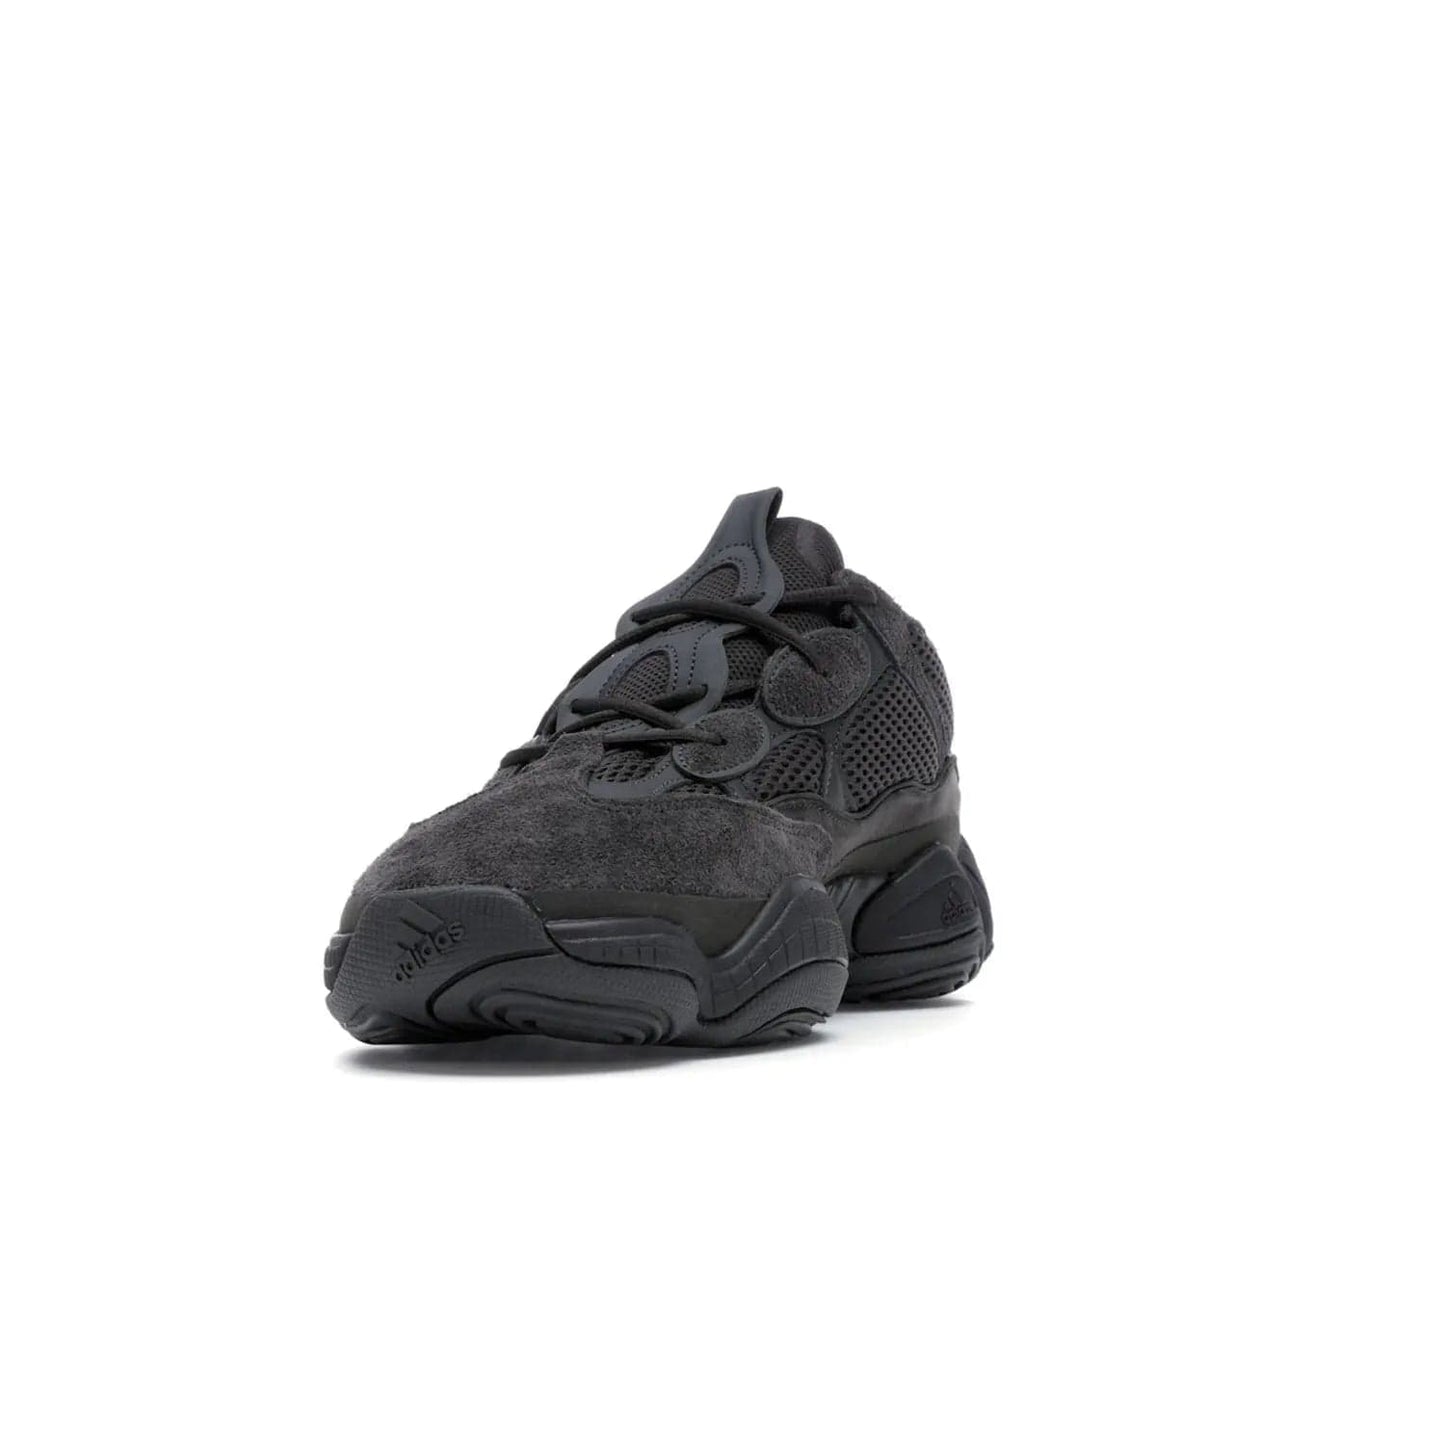 adidas Yeezy 500 Utility Black - Image 13 - Only at www.BallersClubKickz.com - Iconic adidas Yeezy 500 Utility Black in All-Black colorway. Durable black mesh and suede upper with adiPRENE® sole delivers comfort and support. Be unstoppable with the Yeezy 500 Utility Black. Released July 2018.